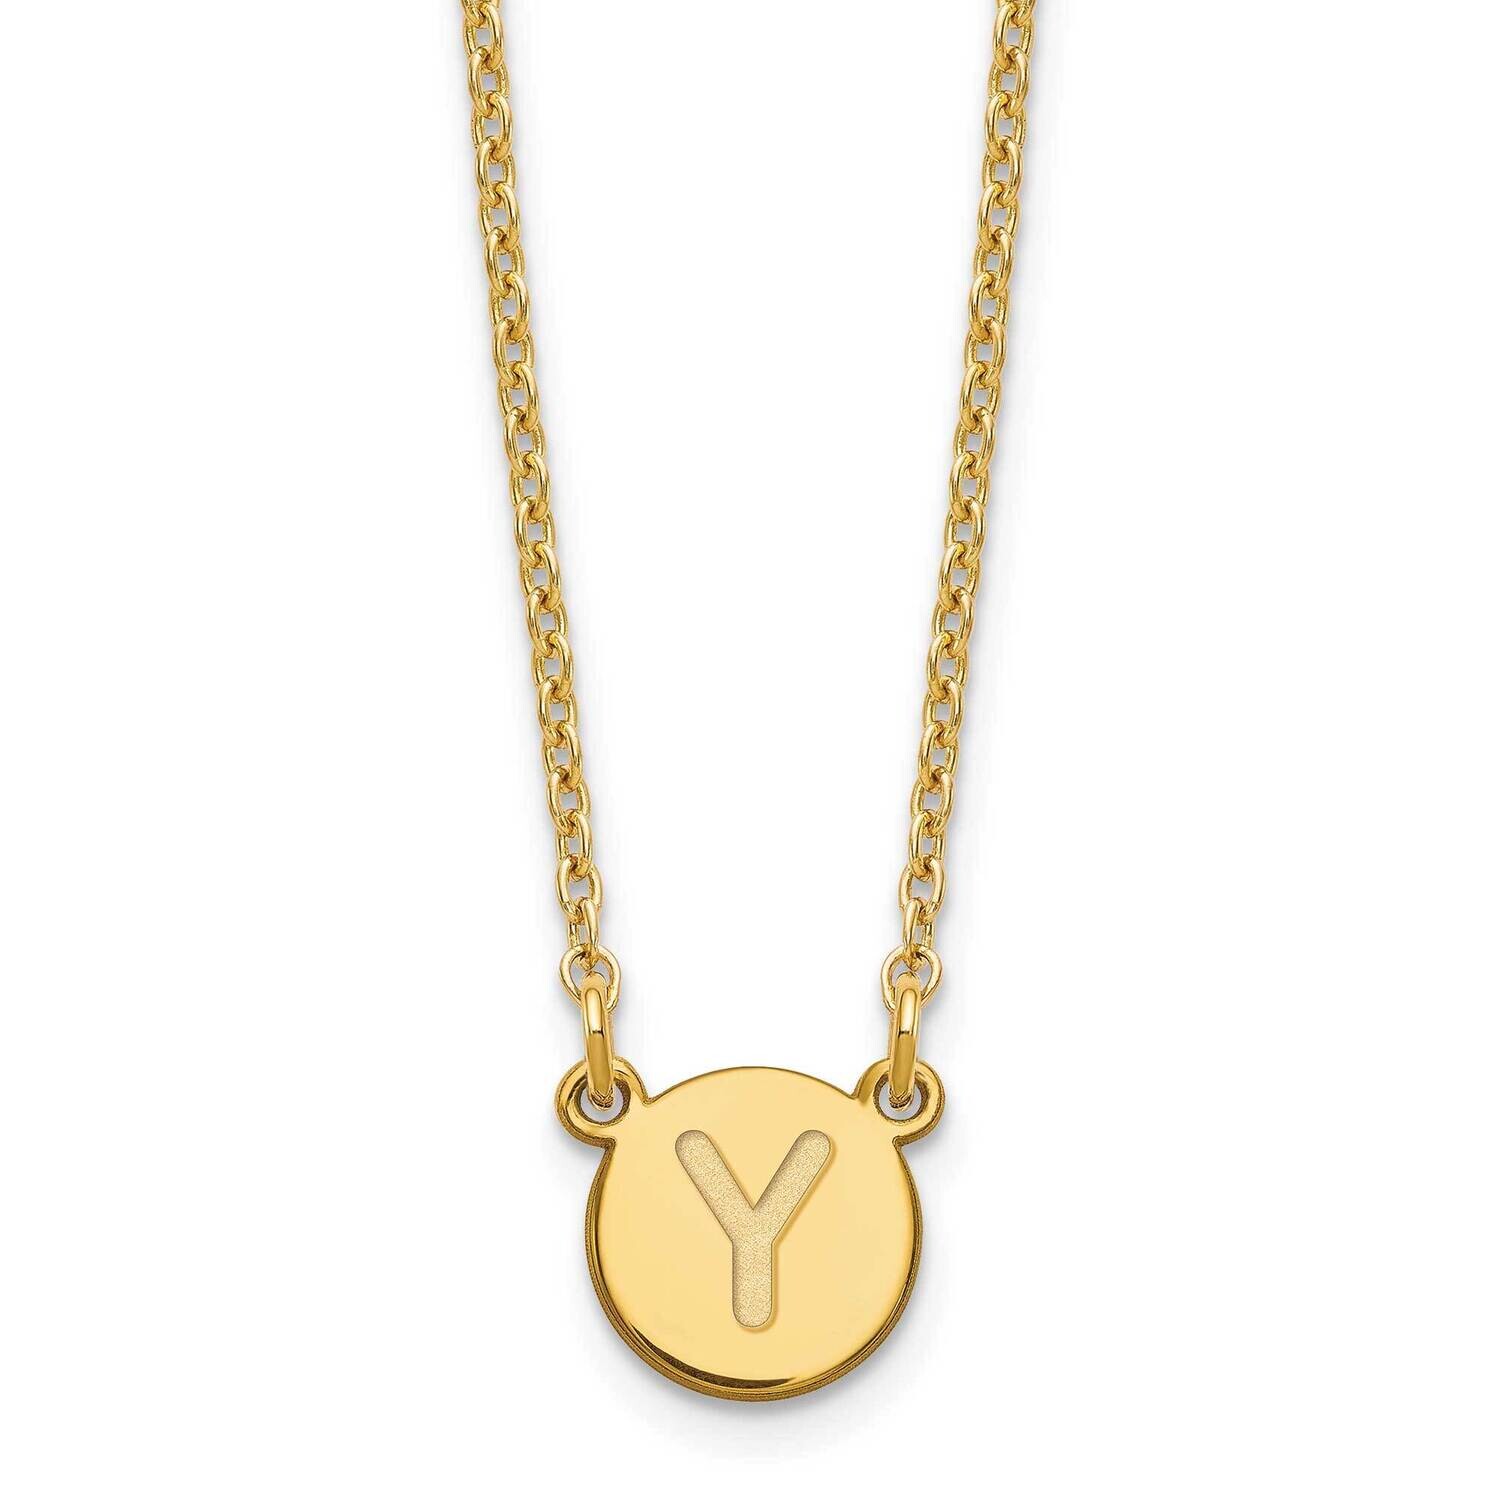 Gold-Plated Tiny Circle Block Letter Y Initial Necklace Sterling Silver XNA722GP/Y